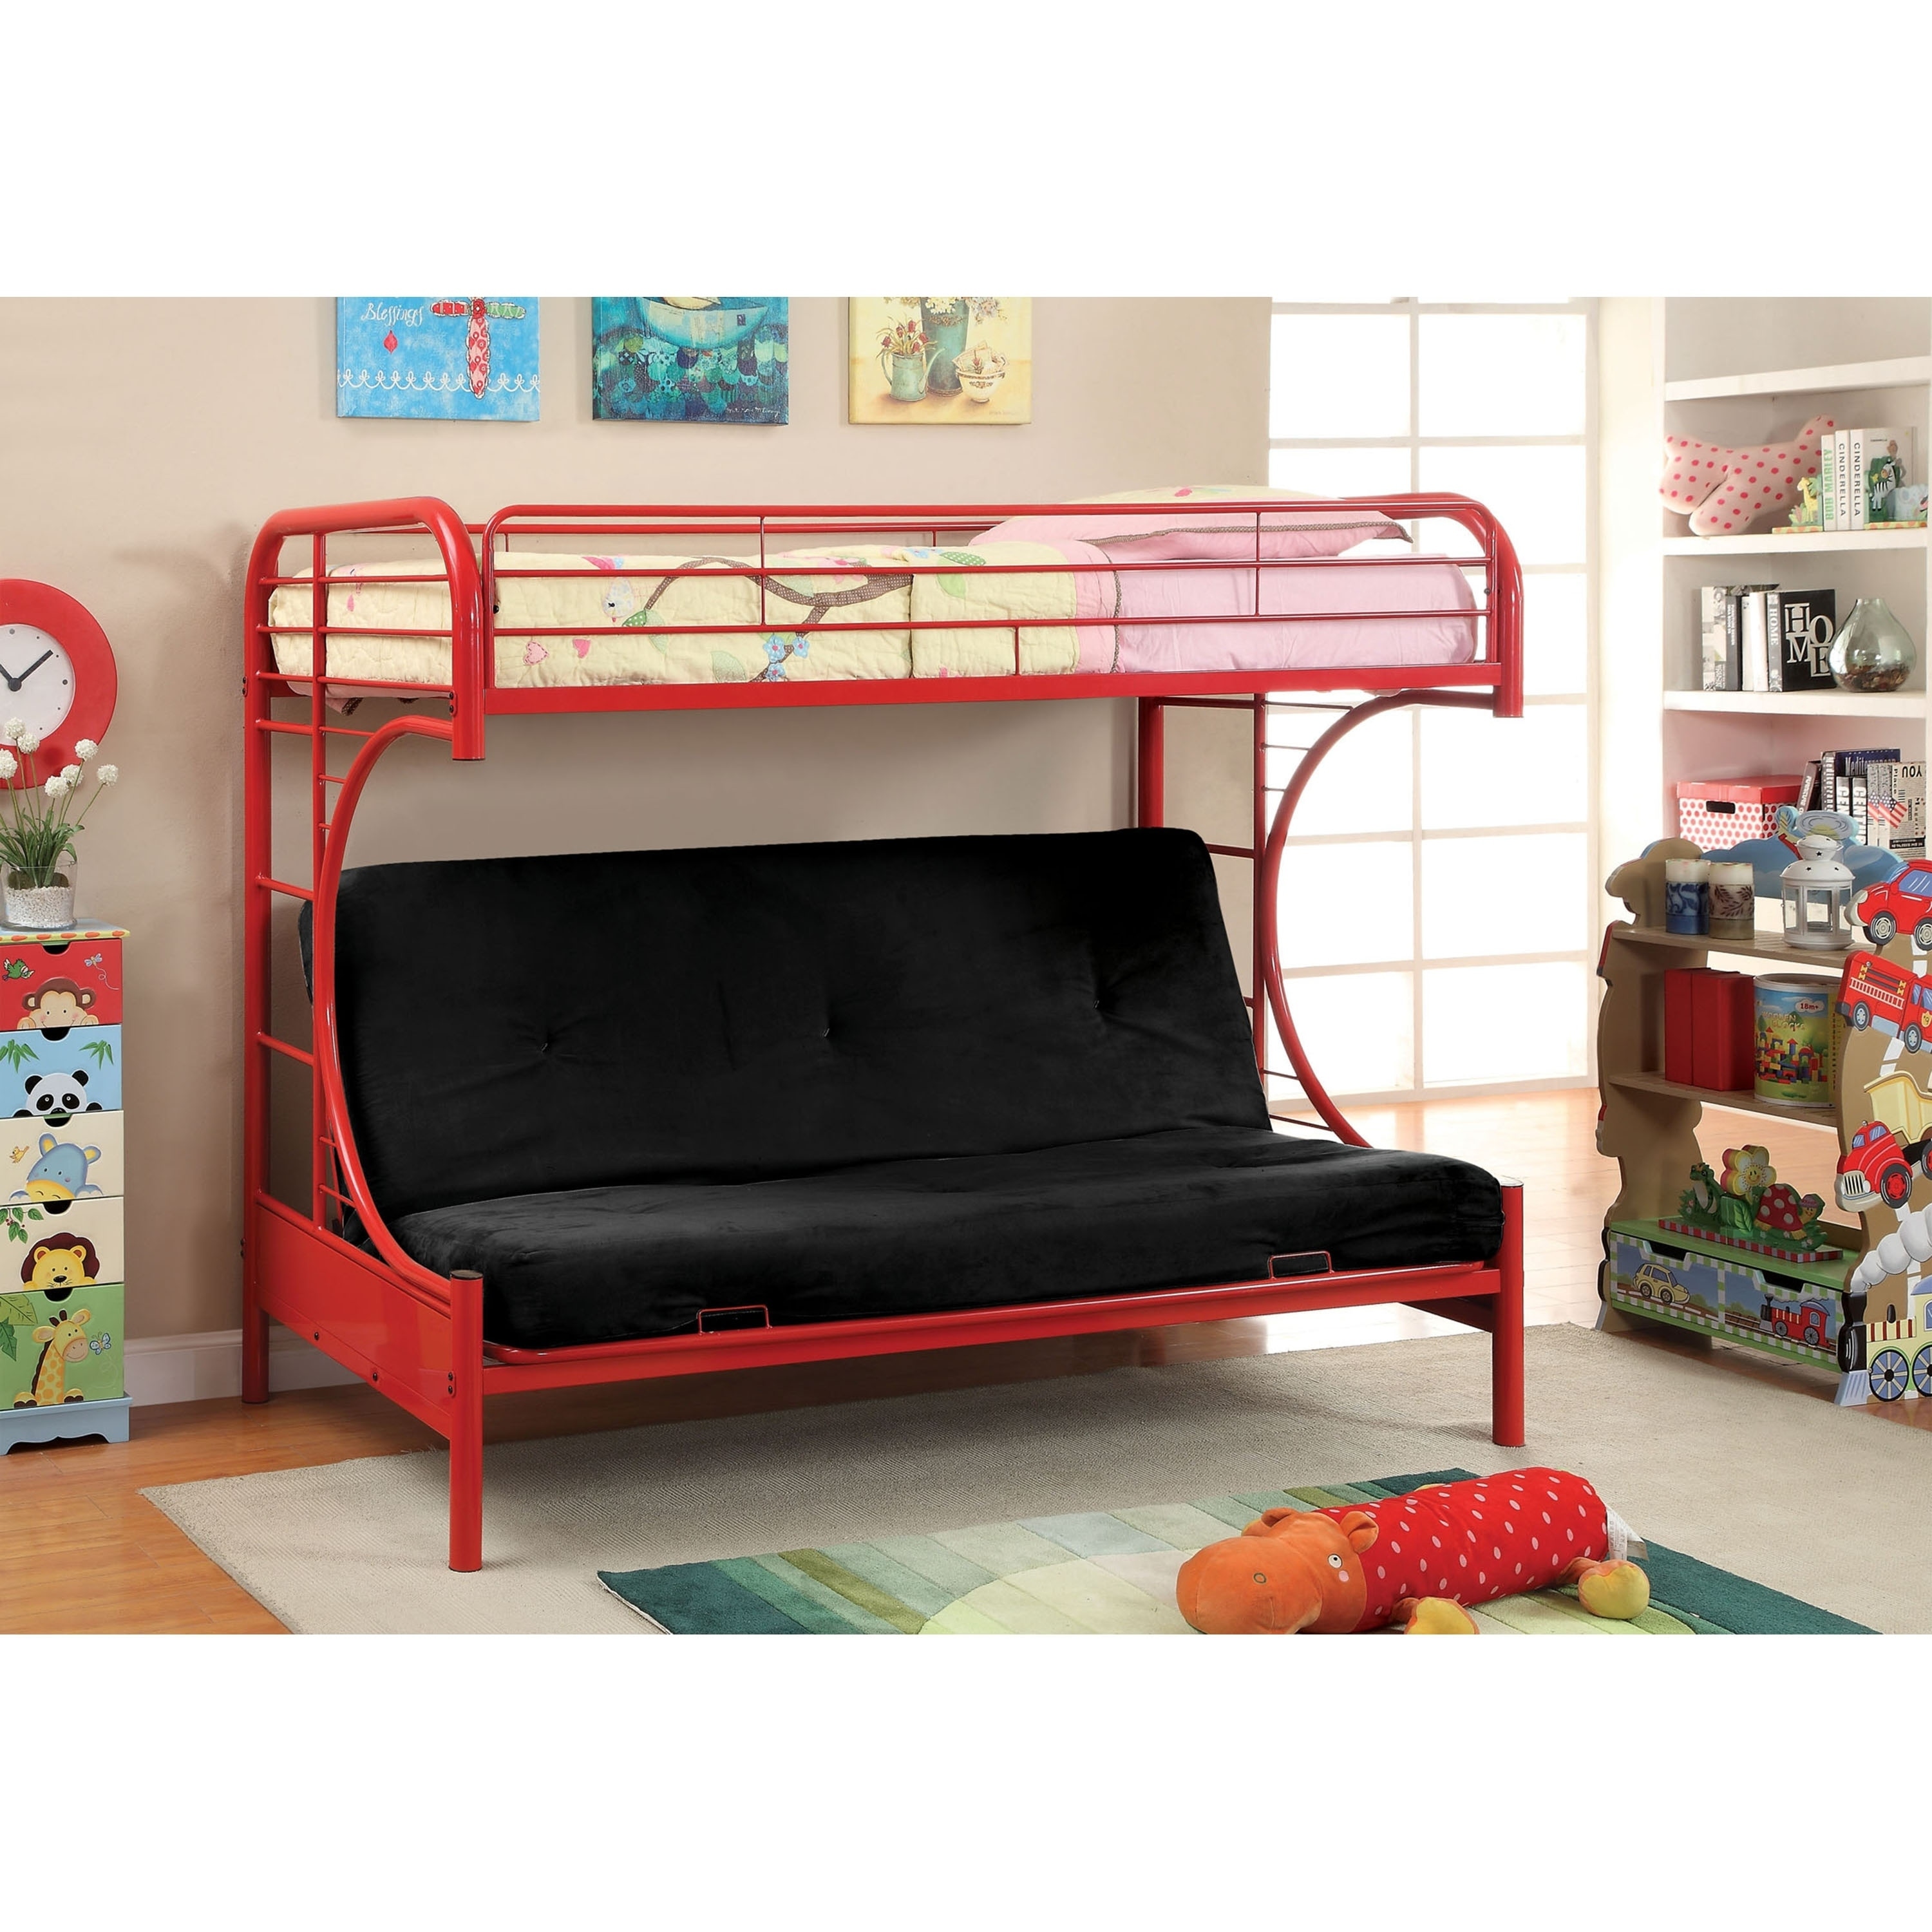 Furniture Of America Linden Twin Over Futon Metal Bunk Bed